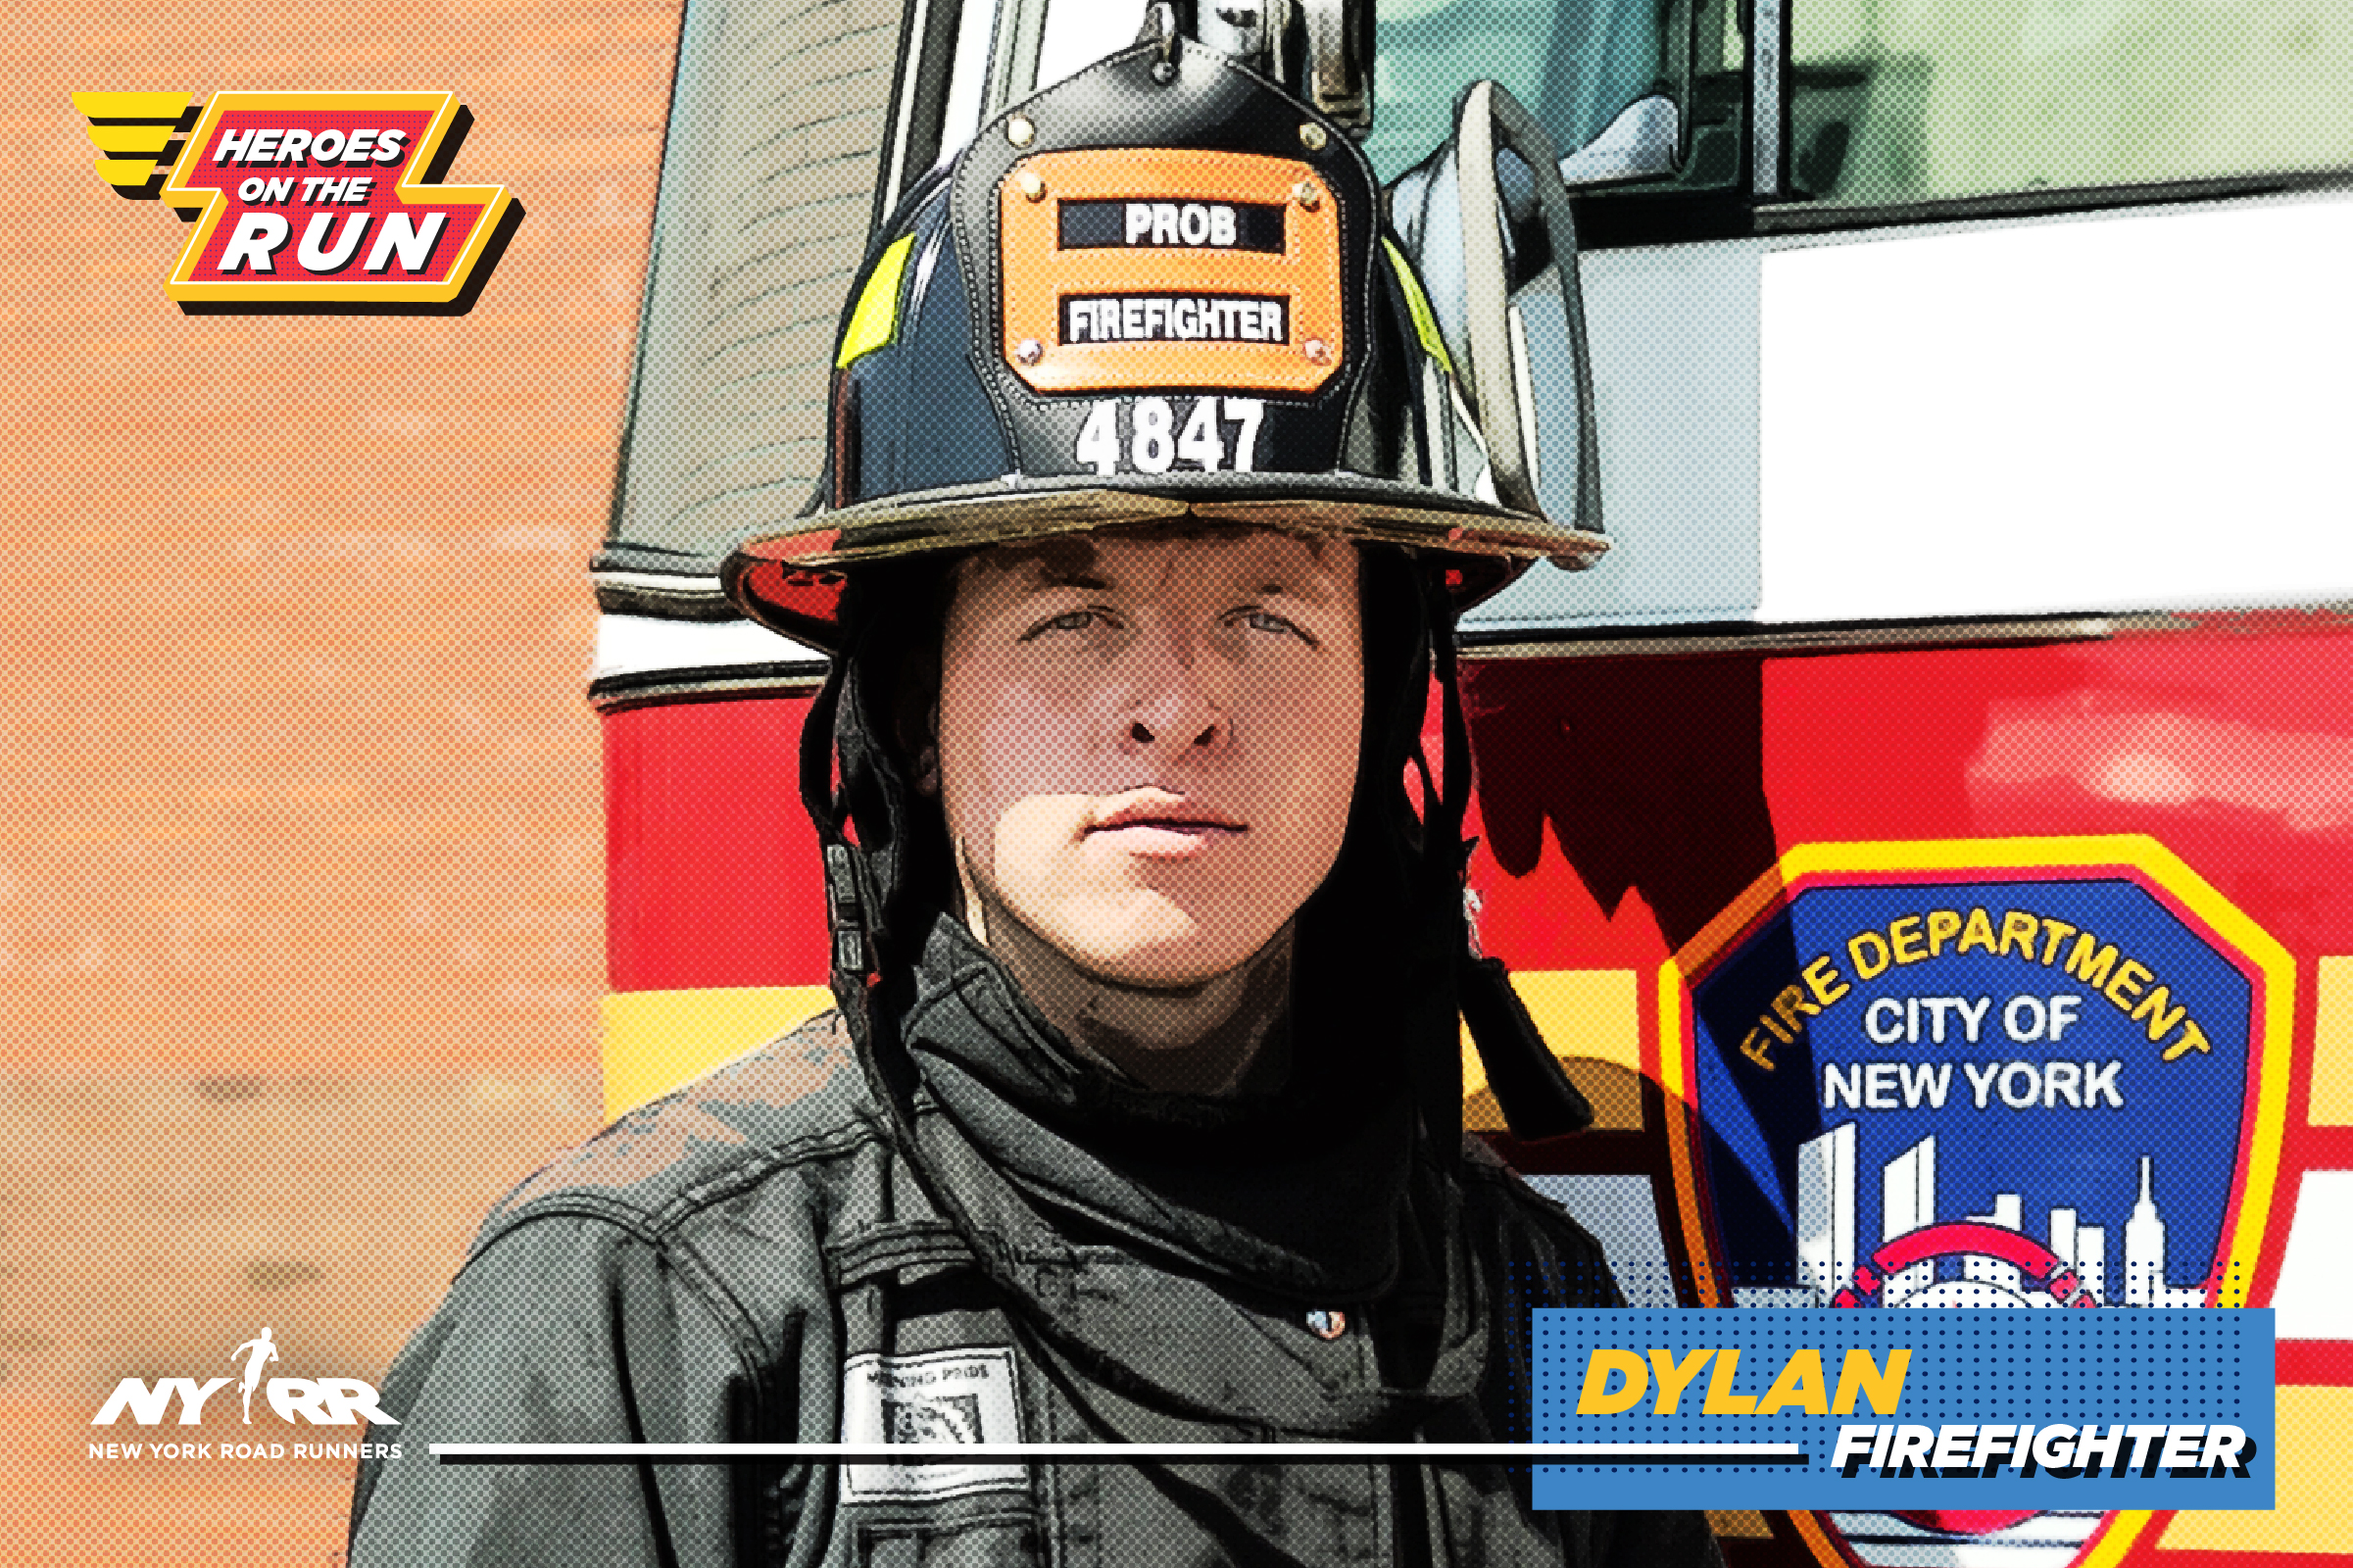 Close-up of Dylan Vidoli in firefighter gear, standing in front of a fire truck, with the Heroes on the Run logo overlaid and a lower-third graphic reading "Dylan: Firefighter"